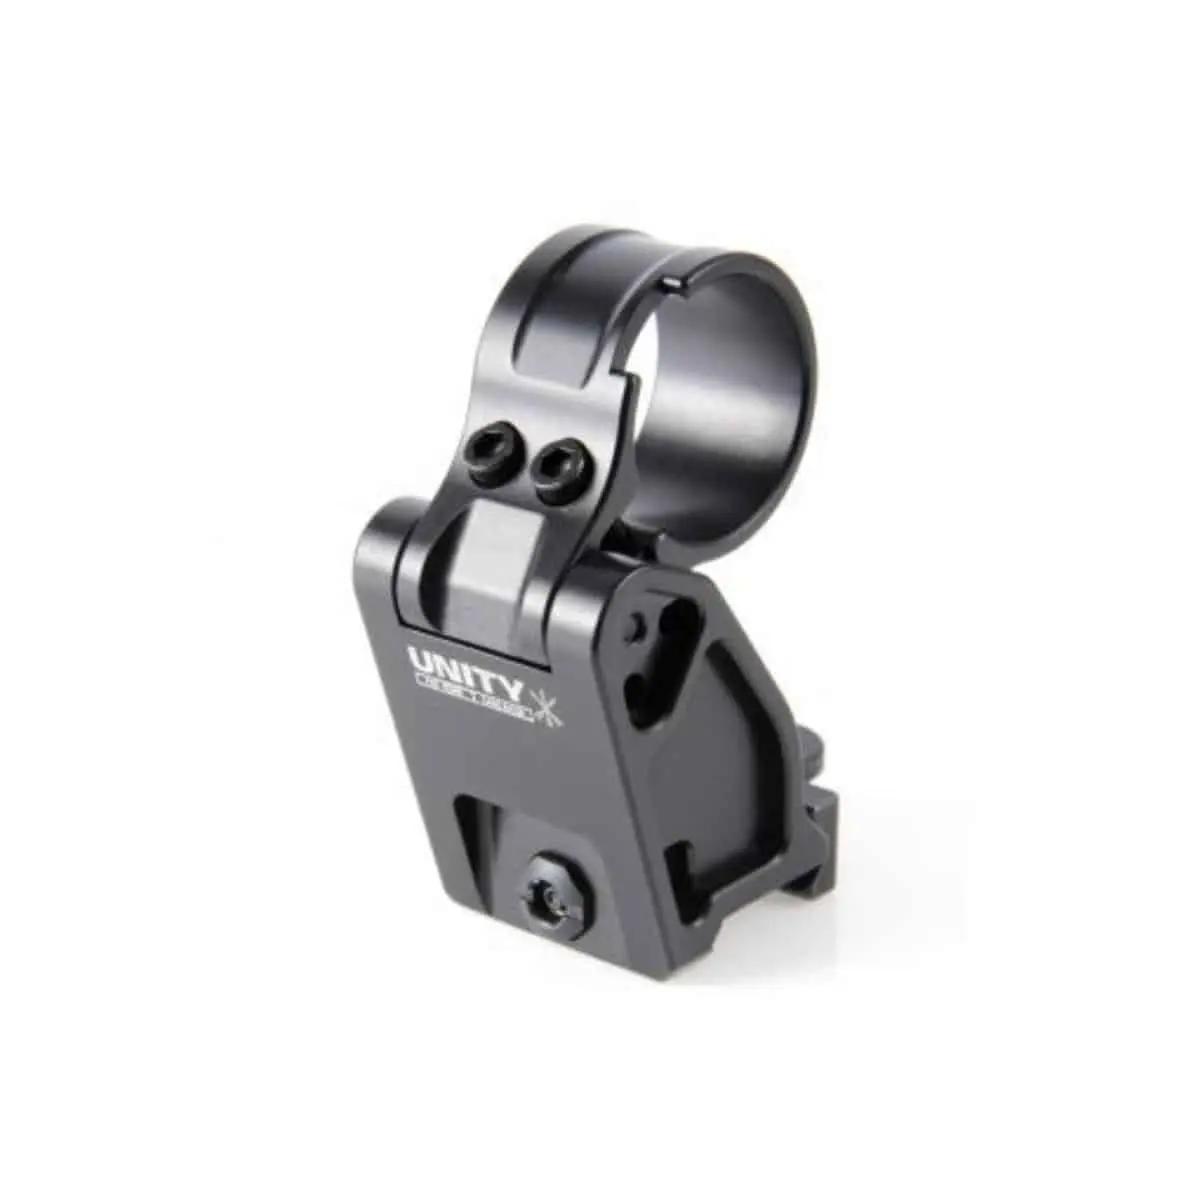 unity tactical fast ftc aimpoint magnifier mount black